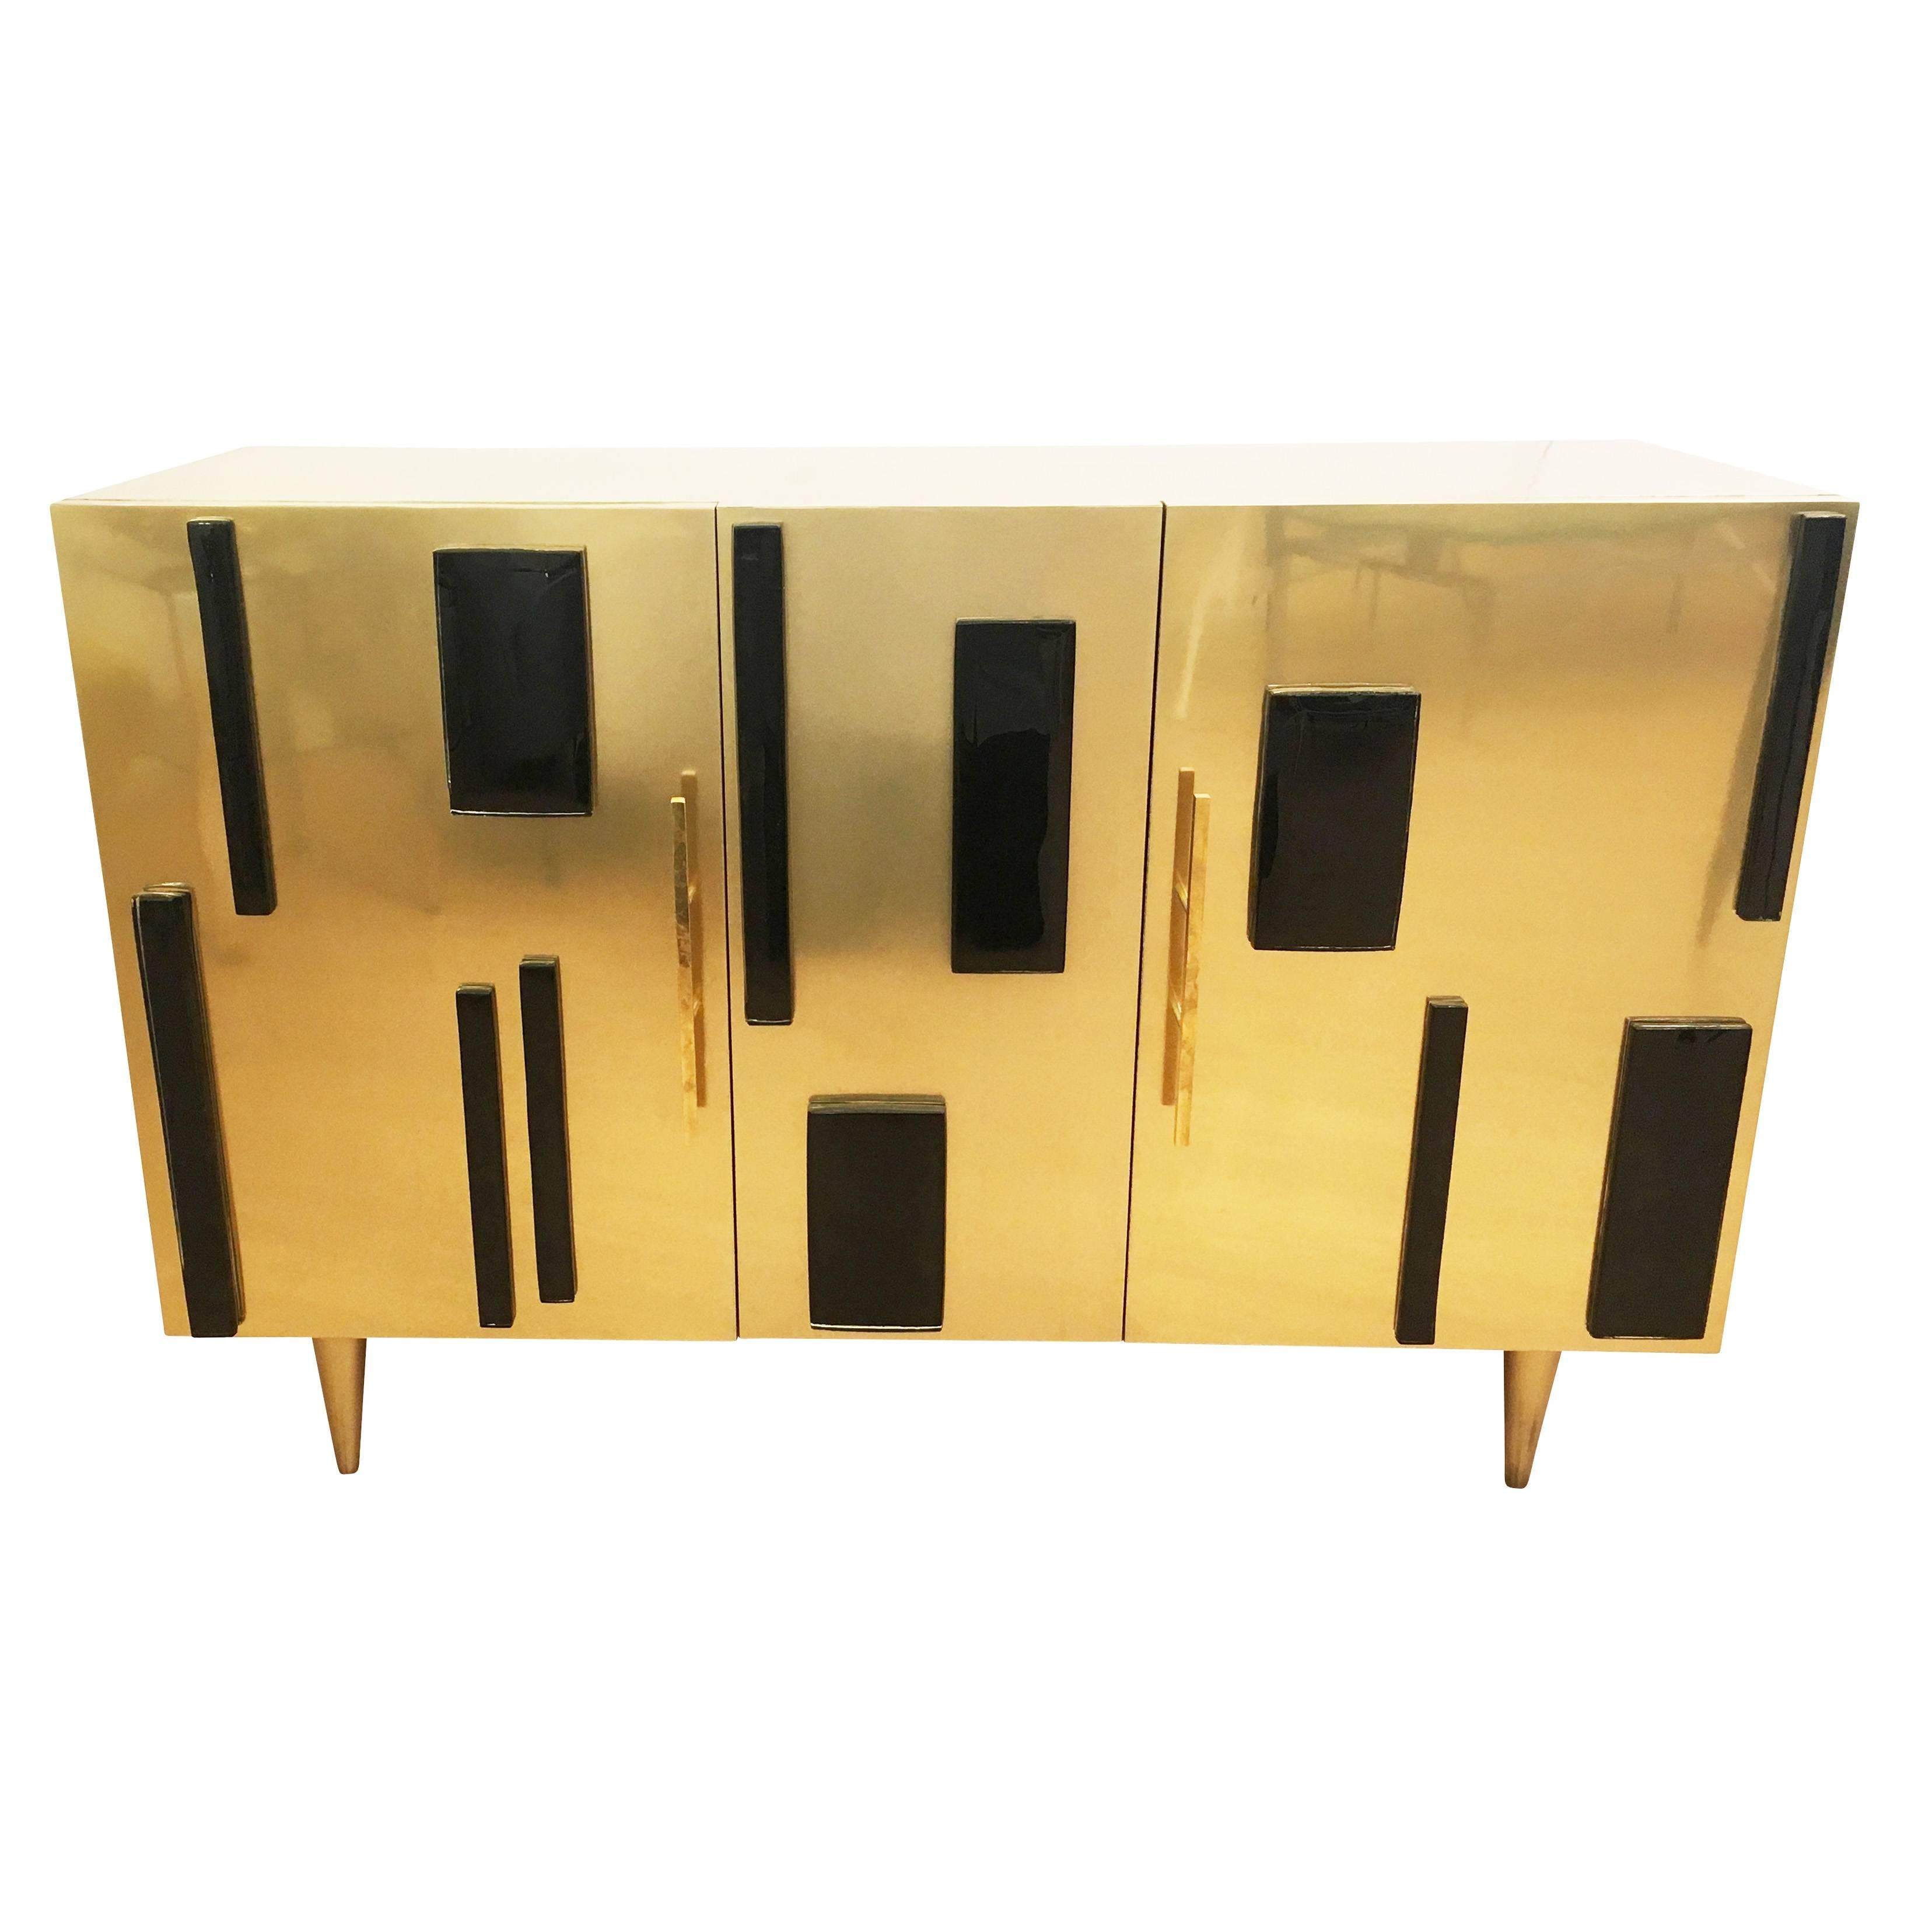 Limited edition credenza made by Italian artisan furniture maker, Interno 43 exclusively for Gaspare Asaro’s, studio line, formA. Paneled in brass and decorated with black glass. This is a special price for the last floor model-Original price was